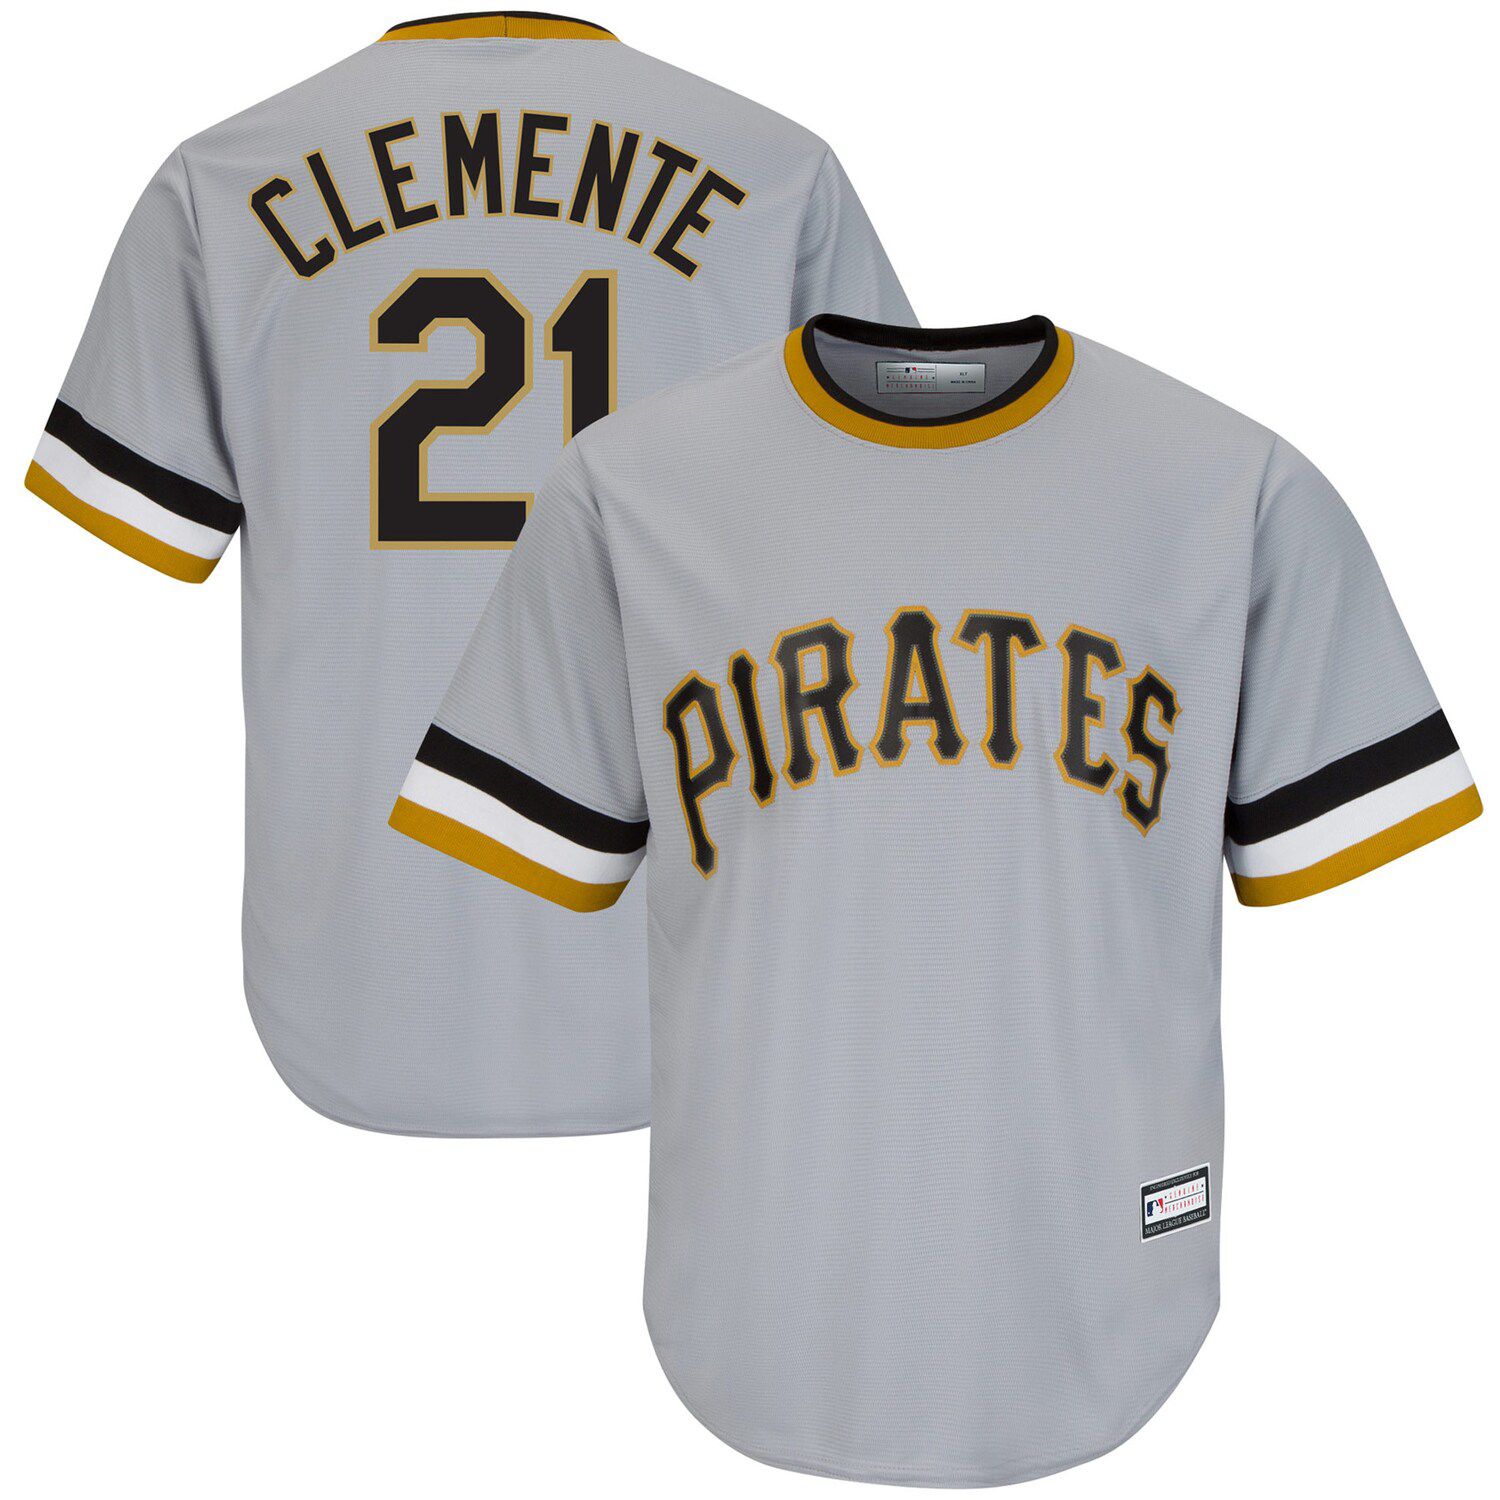 roberto clemente authentic jersey